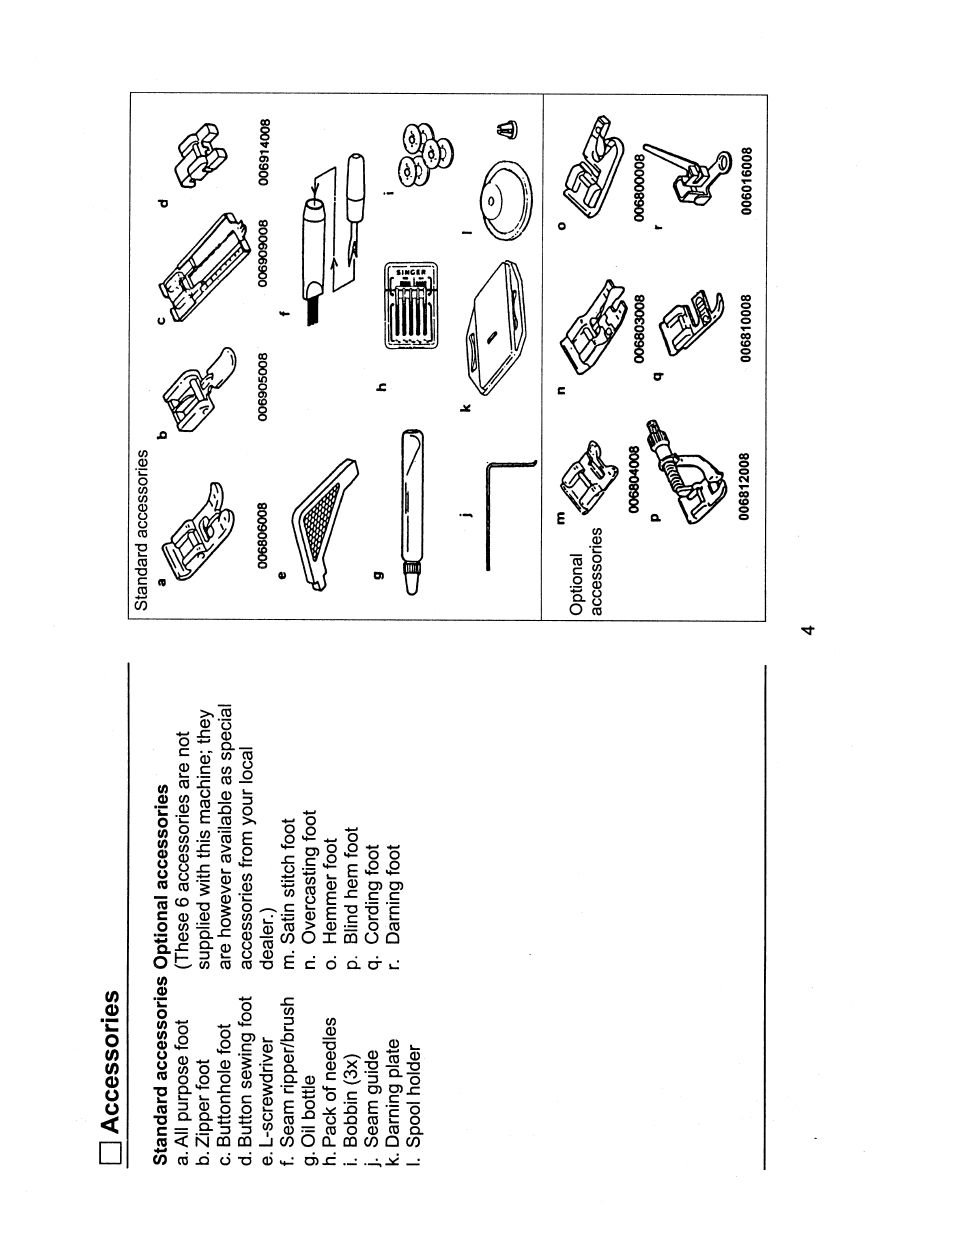 Accessories | SINGER 1116 User Manual | Page 7 / 41